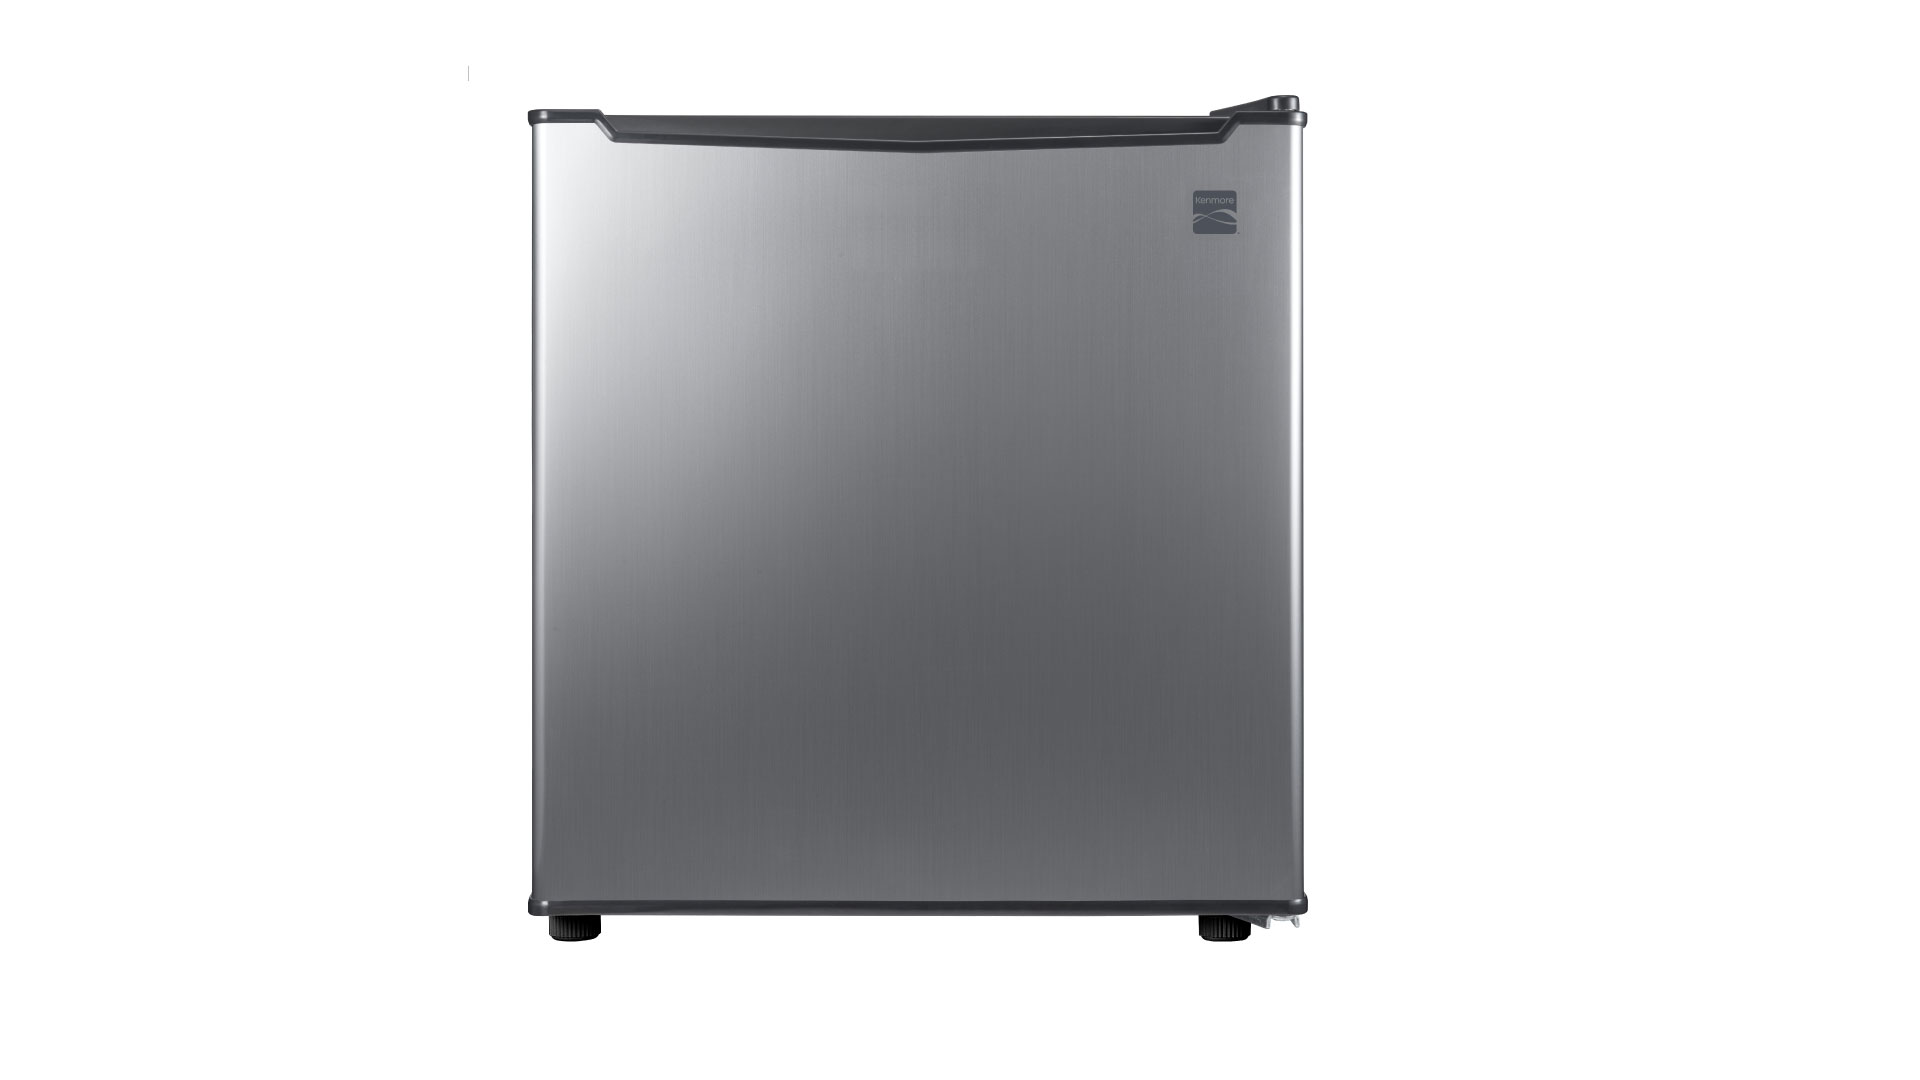 Kenmore 1.7 cubic foot fridge, silver, side picture.